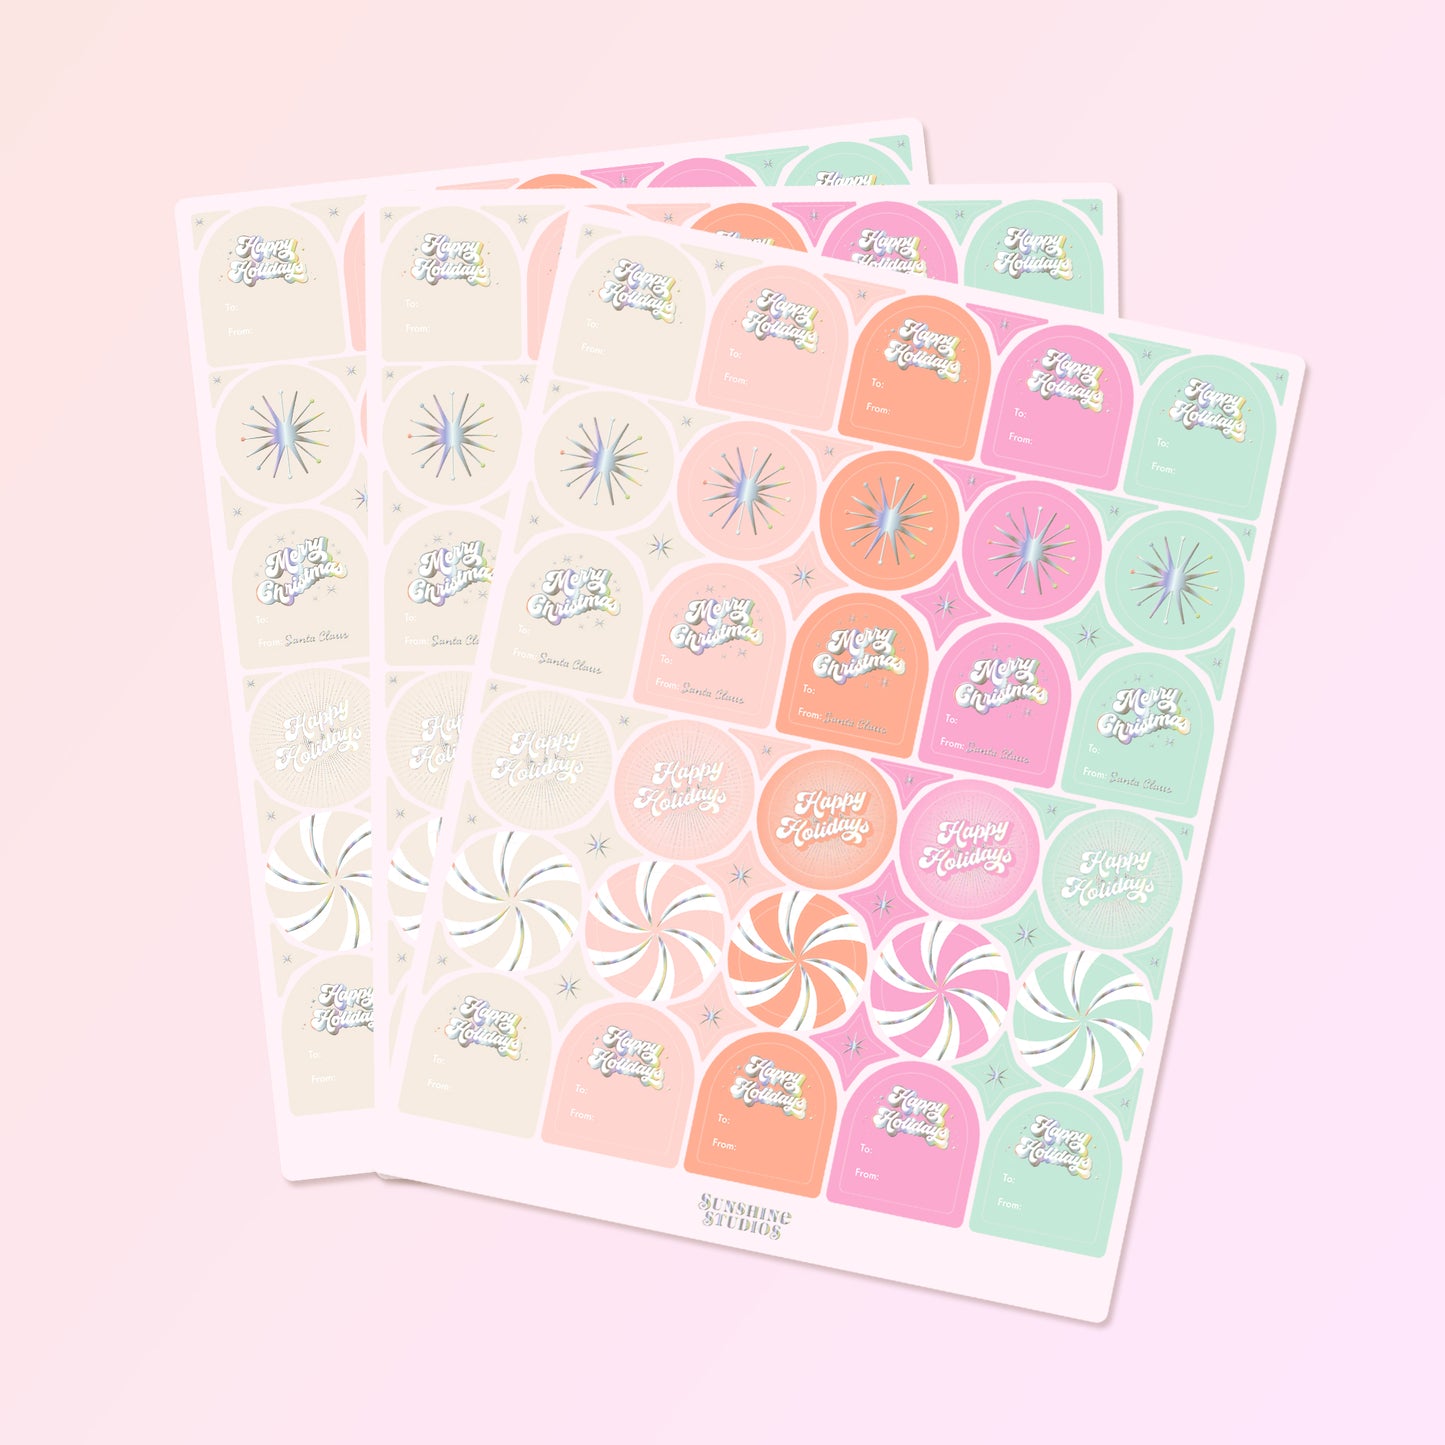 On a pink background is three sheets of gift labels with shades of pink, orange, mint and ivory along with holographic text and designs. 